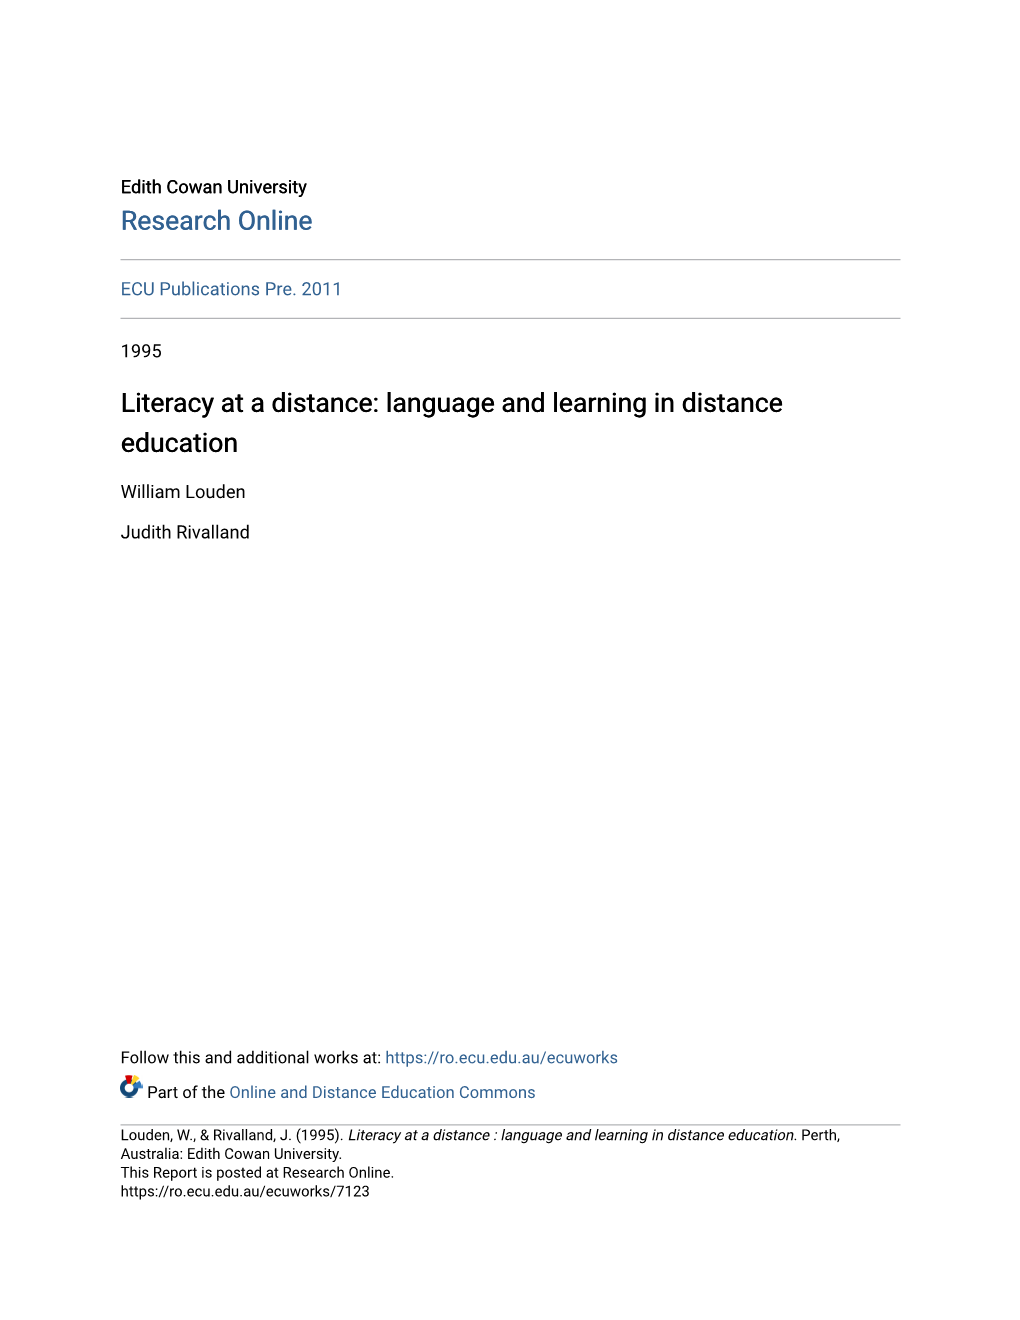 Language and Learning in Distance Education